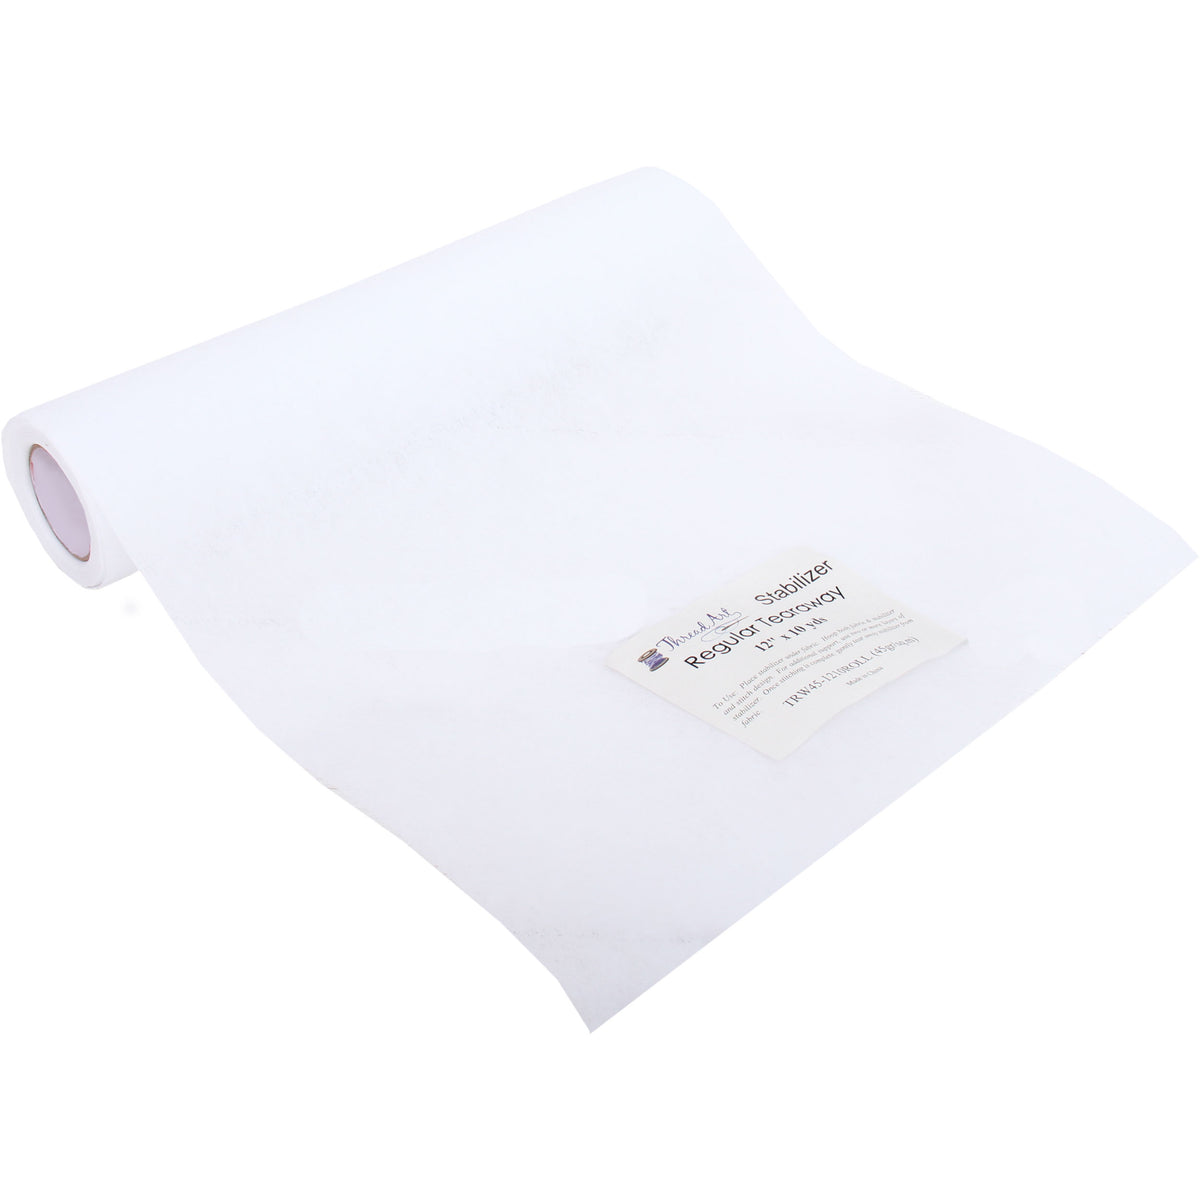 Tearaway Embroidery Stabilizer Backing Sheets (10 x 12 in, 100 Pack), PACK  - Ralphs